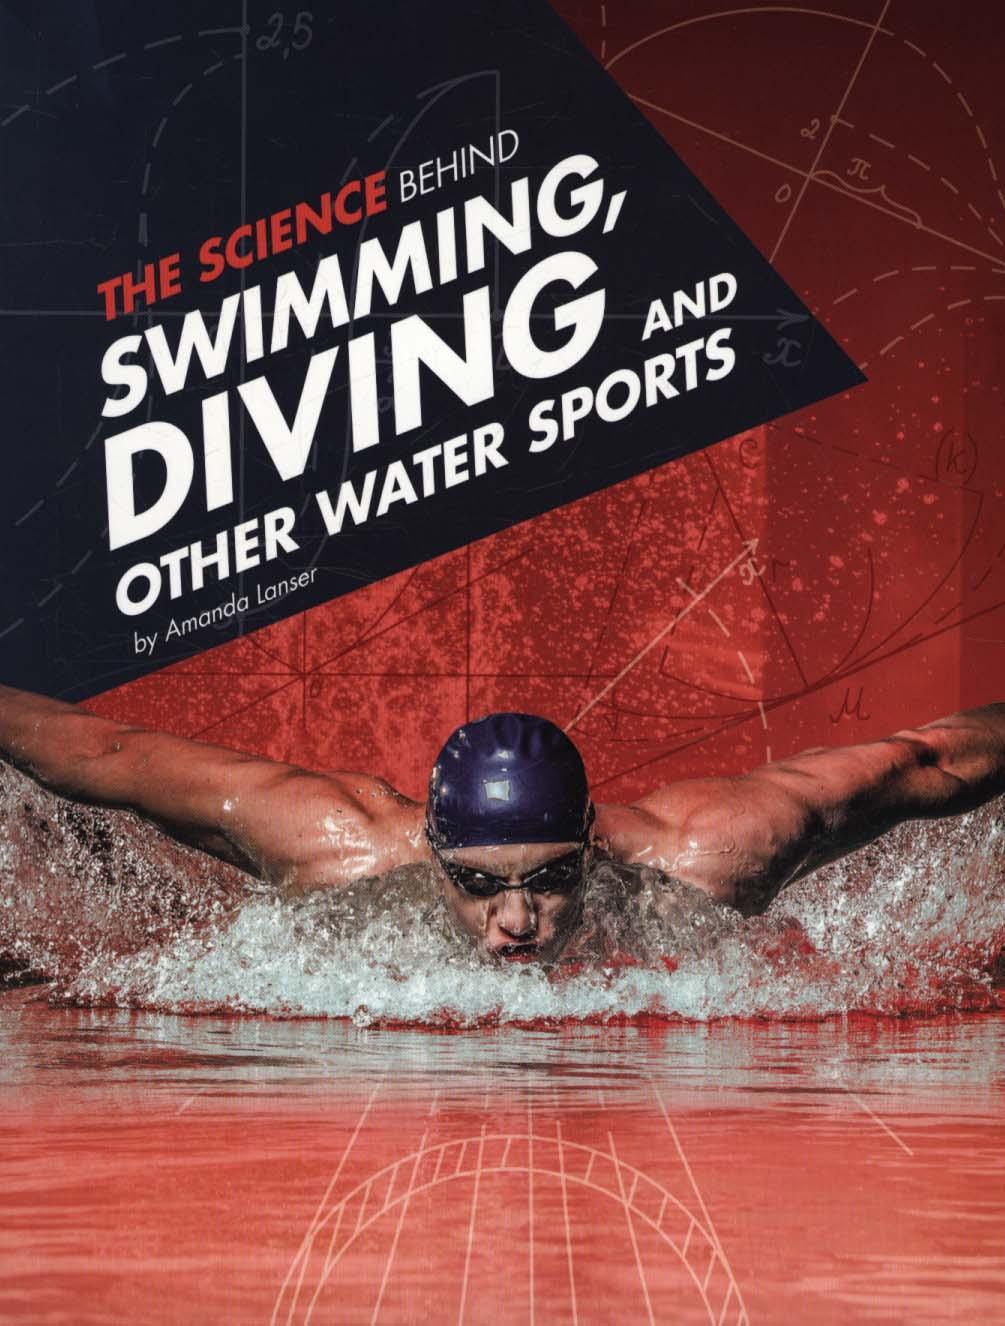 Science Behind Swimming, Diving and Other Water Sports